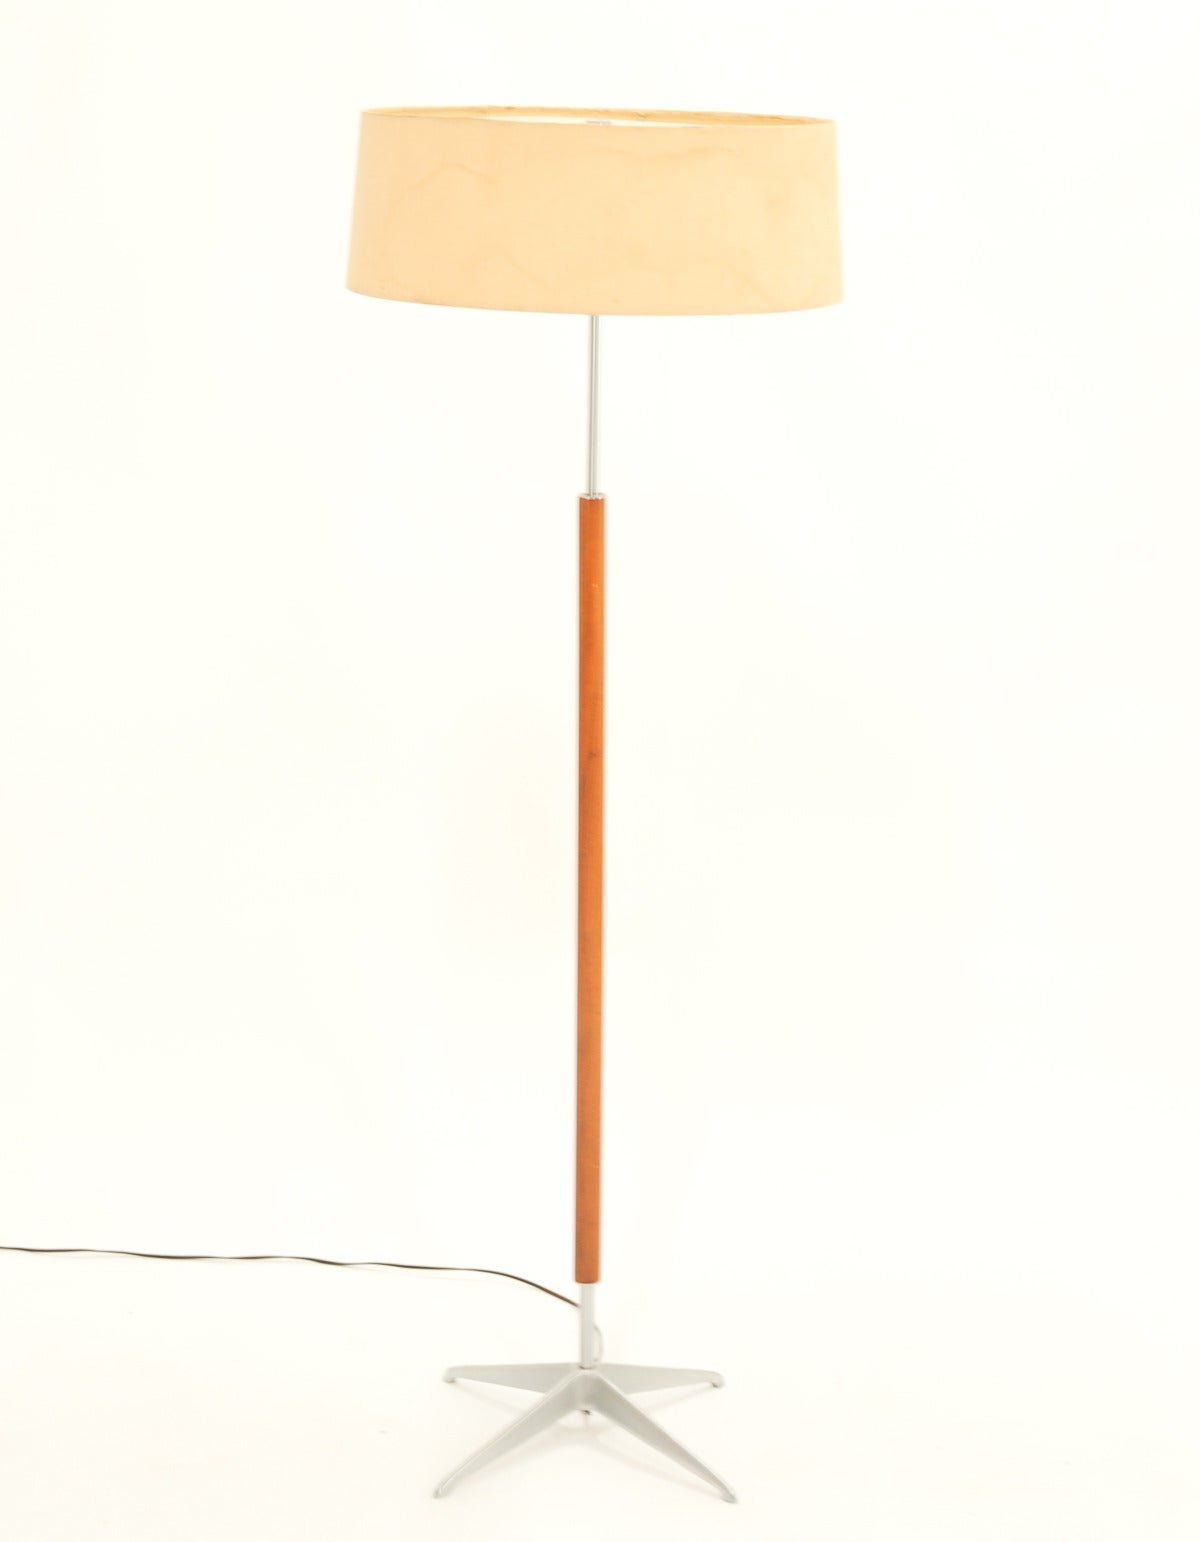 A aluminum and teak floor lamp by Gerald Thurston for Lightolier. The floor lamp comes with an aluminum star base and a walnut upright. The shade is original and needs to be reskin.